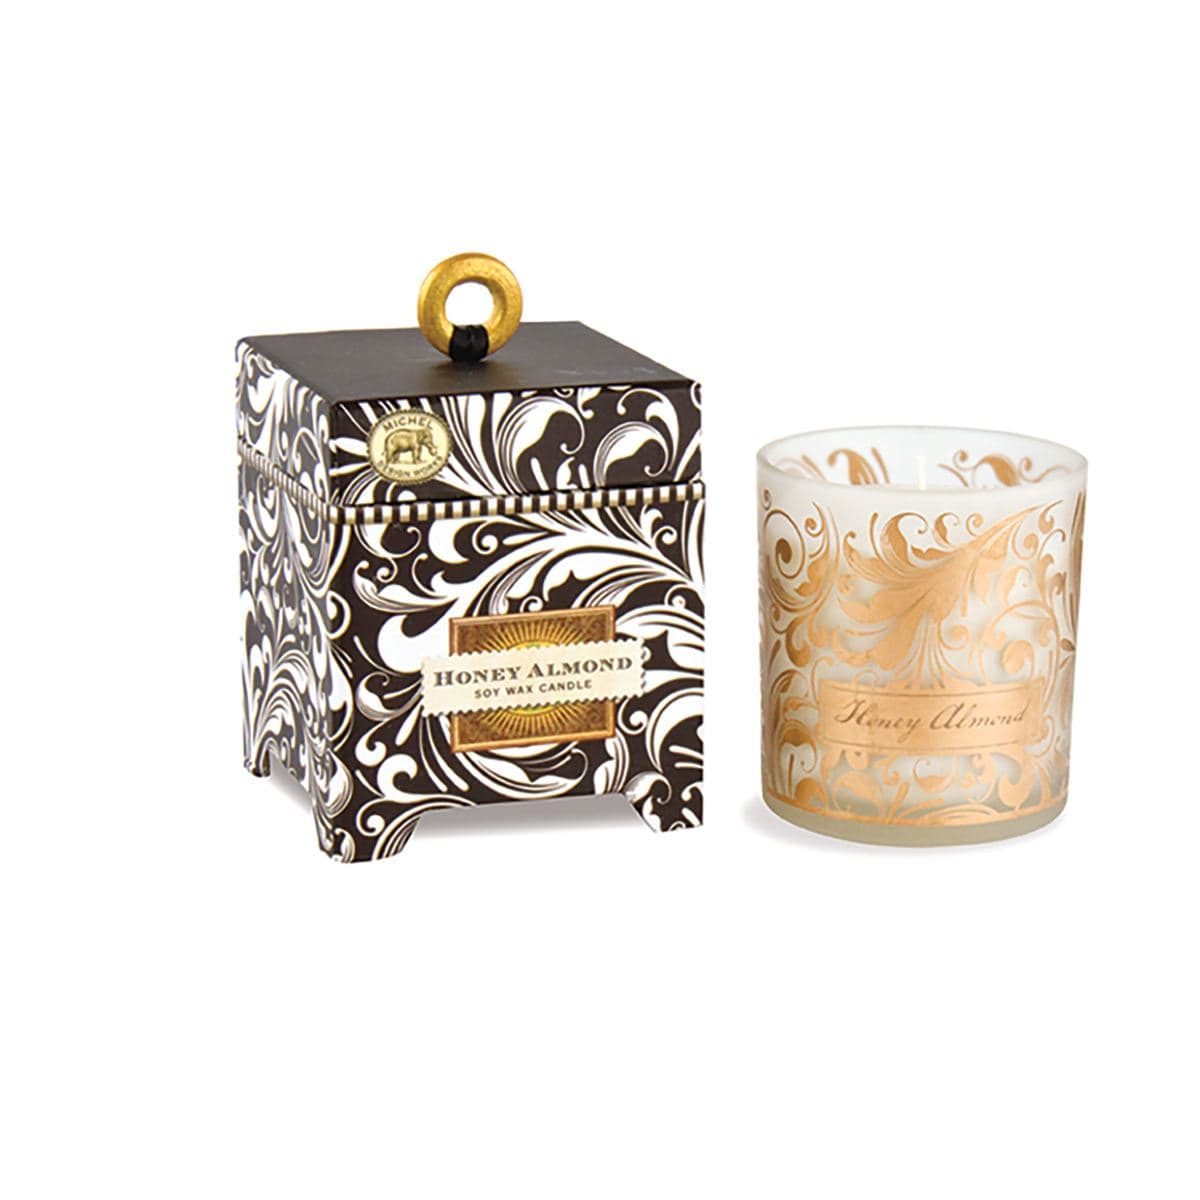 Honey Almond Soy Wax Candle Michel Design Works Candles